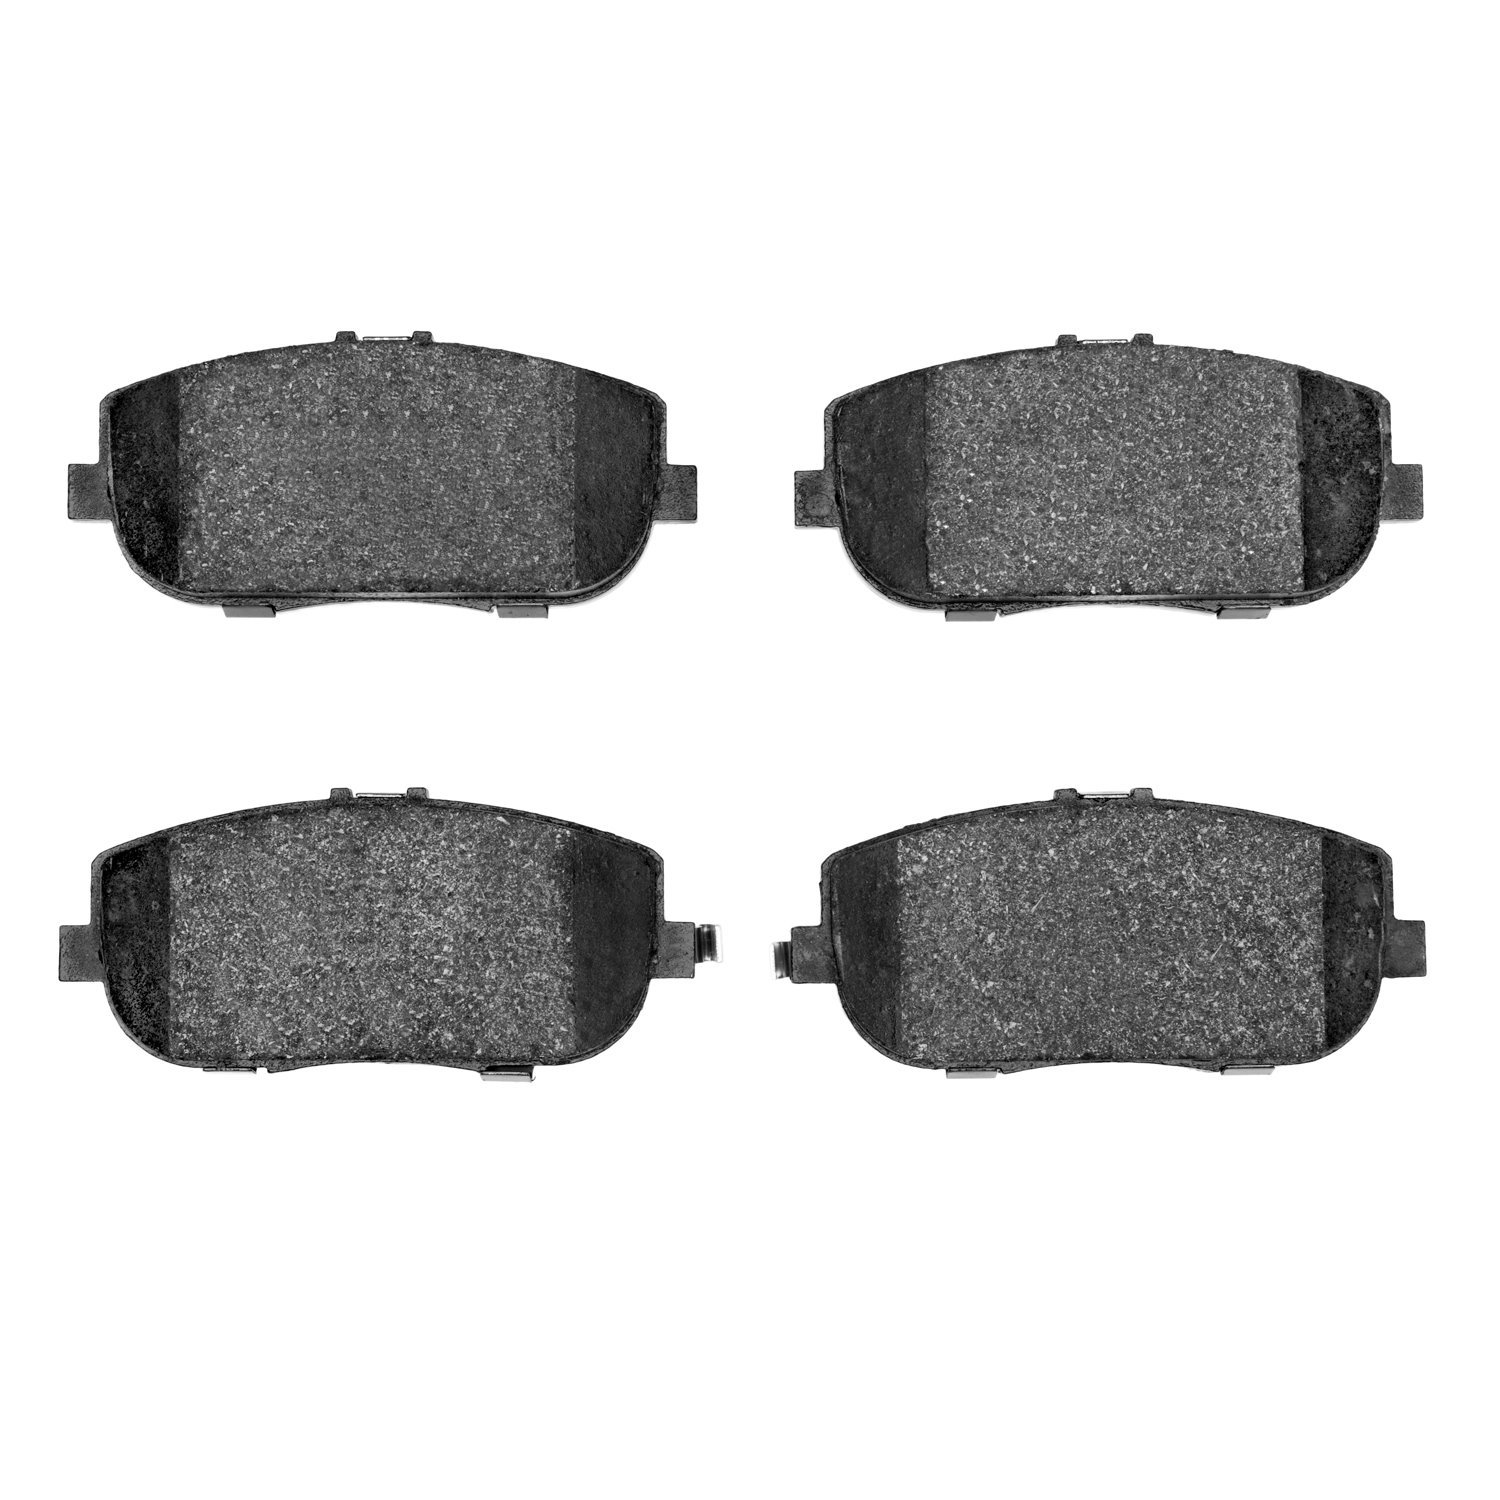 Track/Street Brake Pads, Fits Select Fits Multiple Makes/Models, Position: Rear